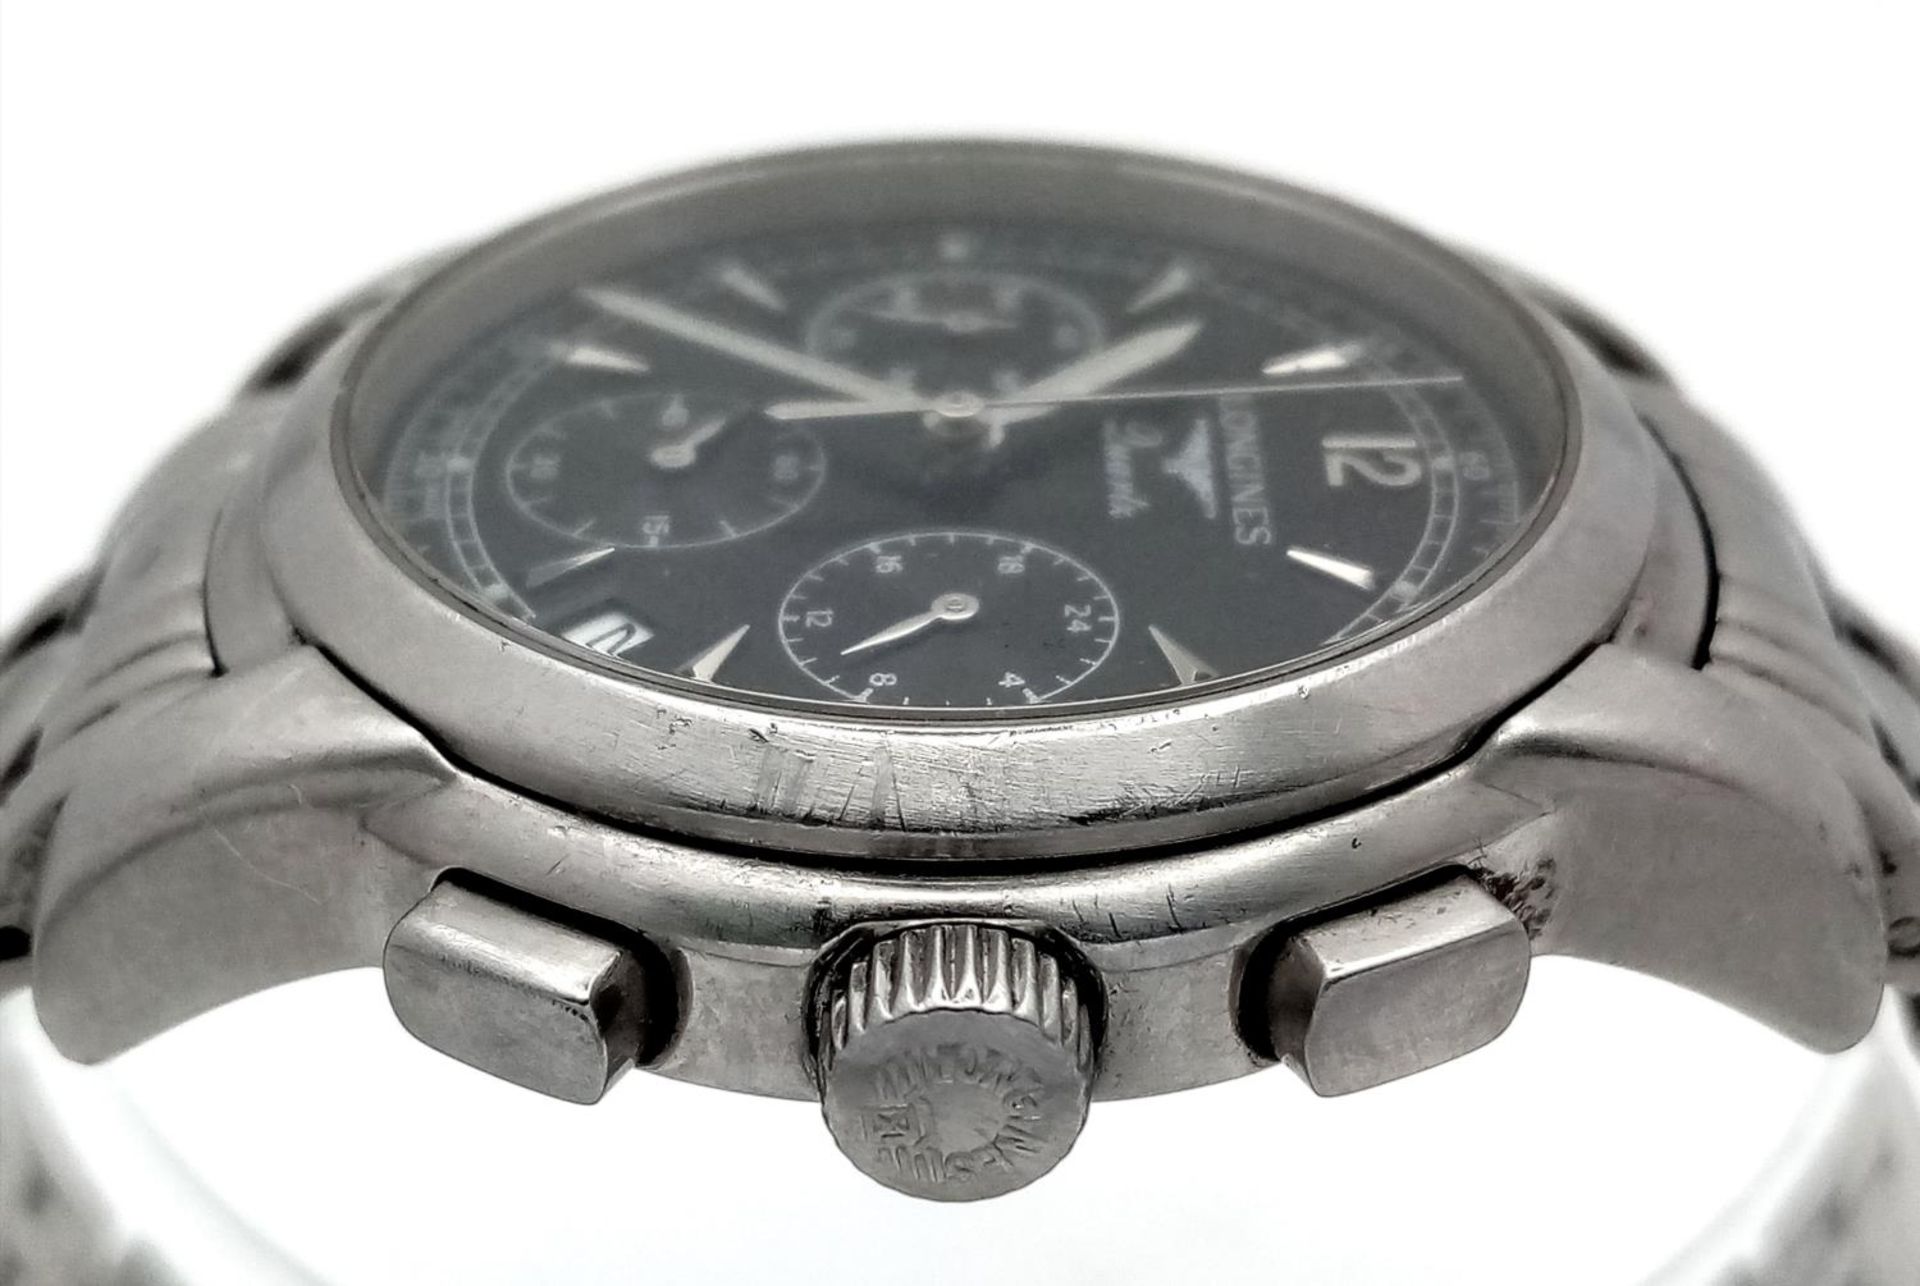 A Longine Quartz Chronograph Gents Watch. Stainless steel bracelet and case - 39mm. Black dial - Image 5 of 9